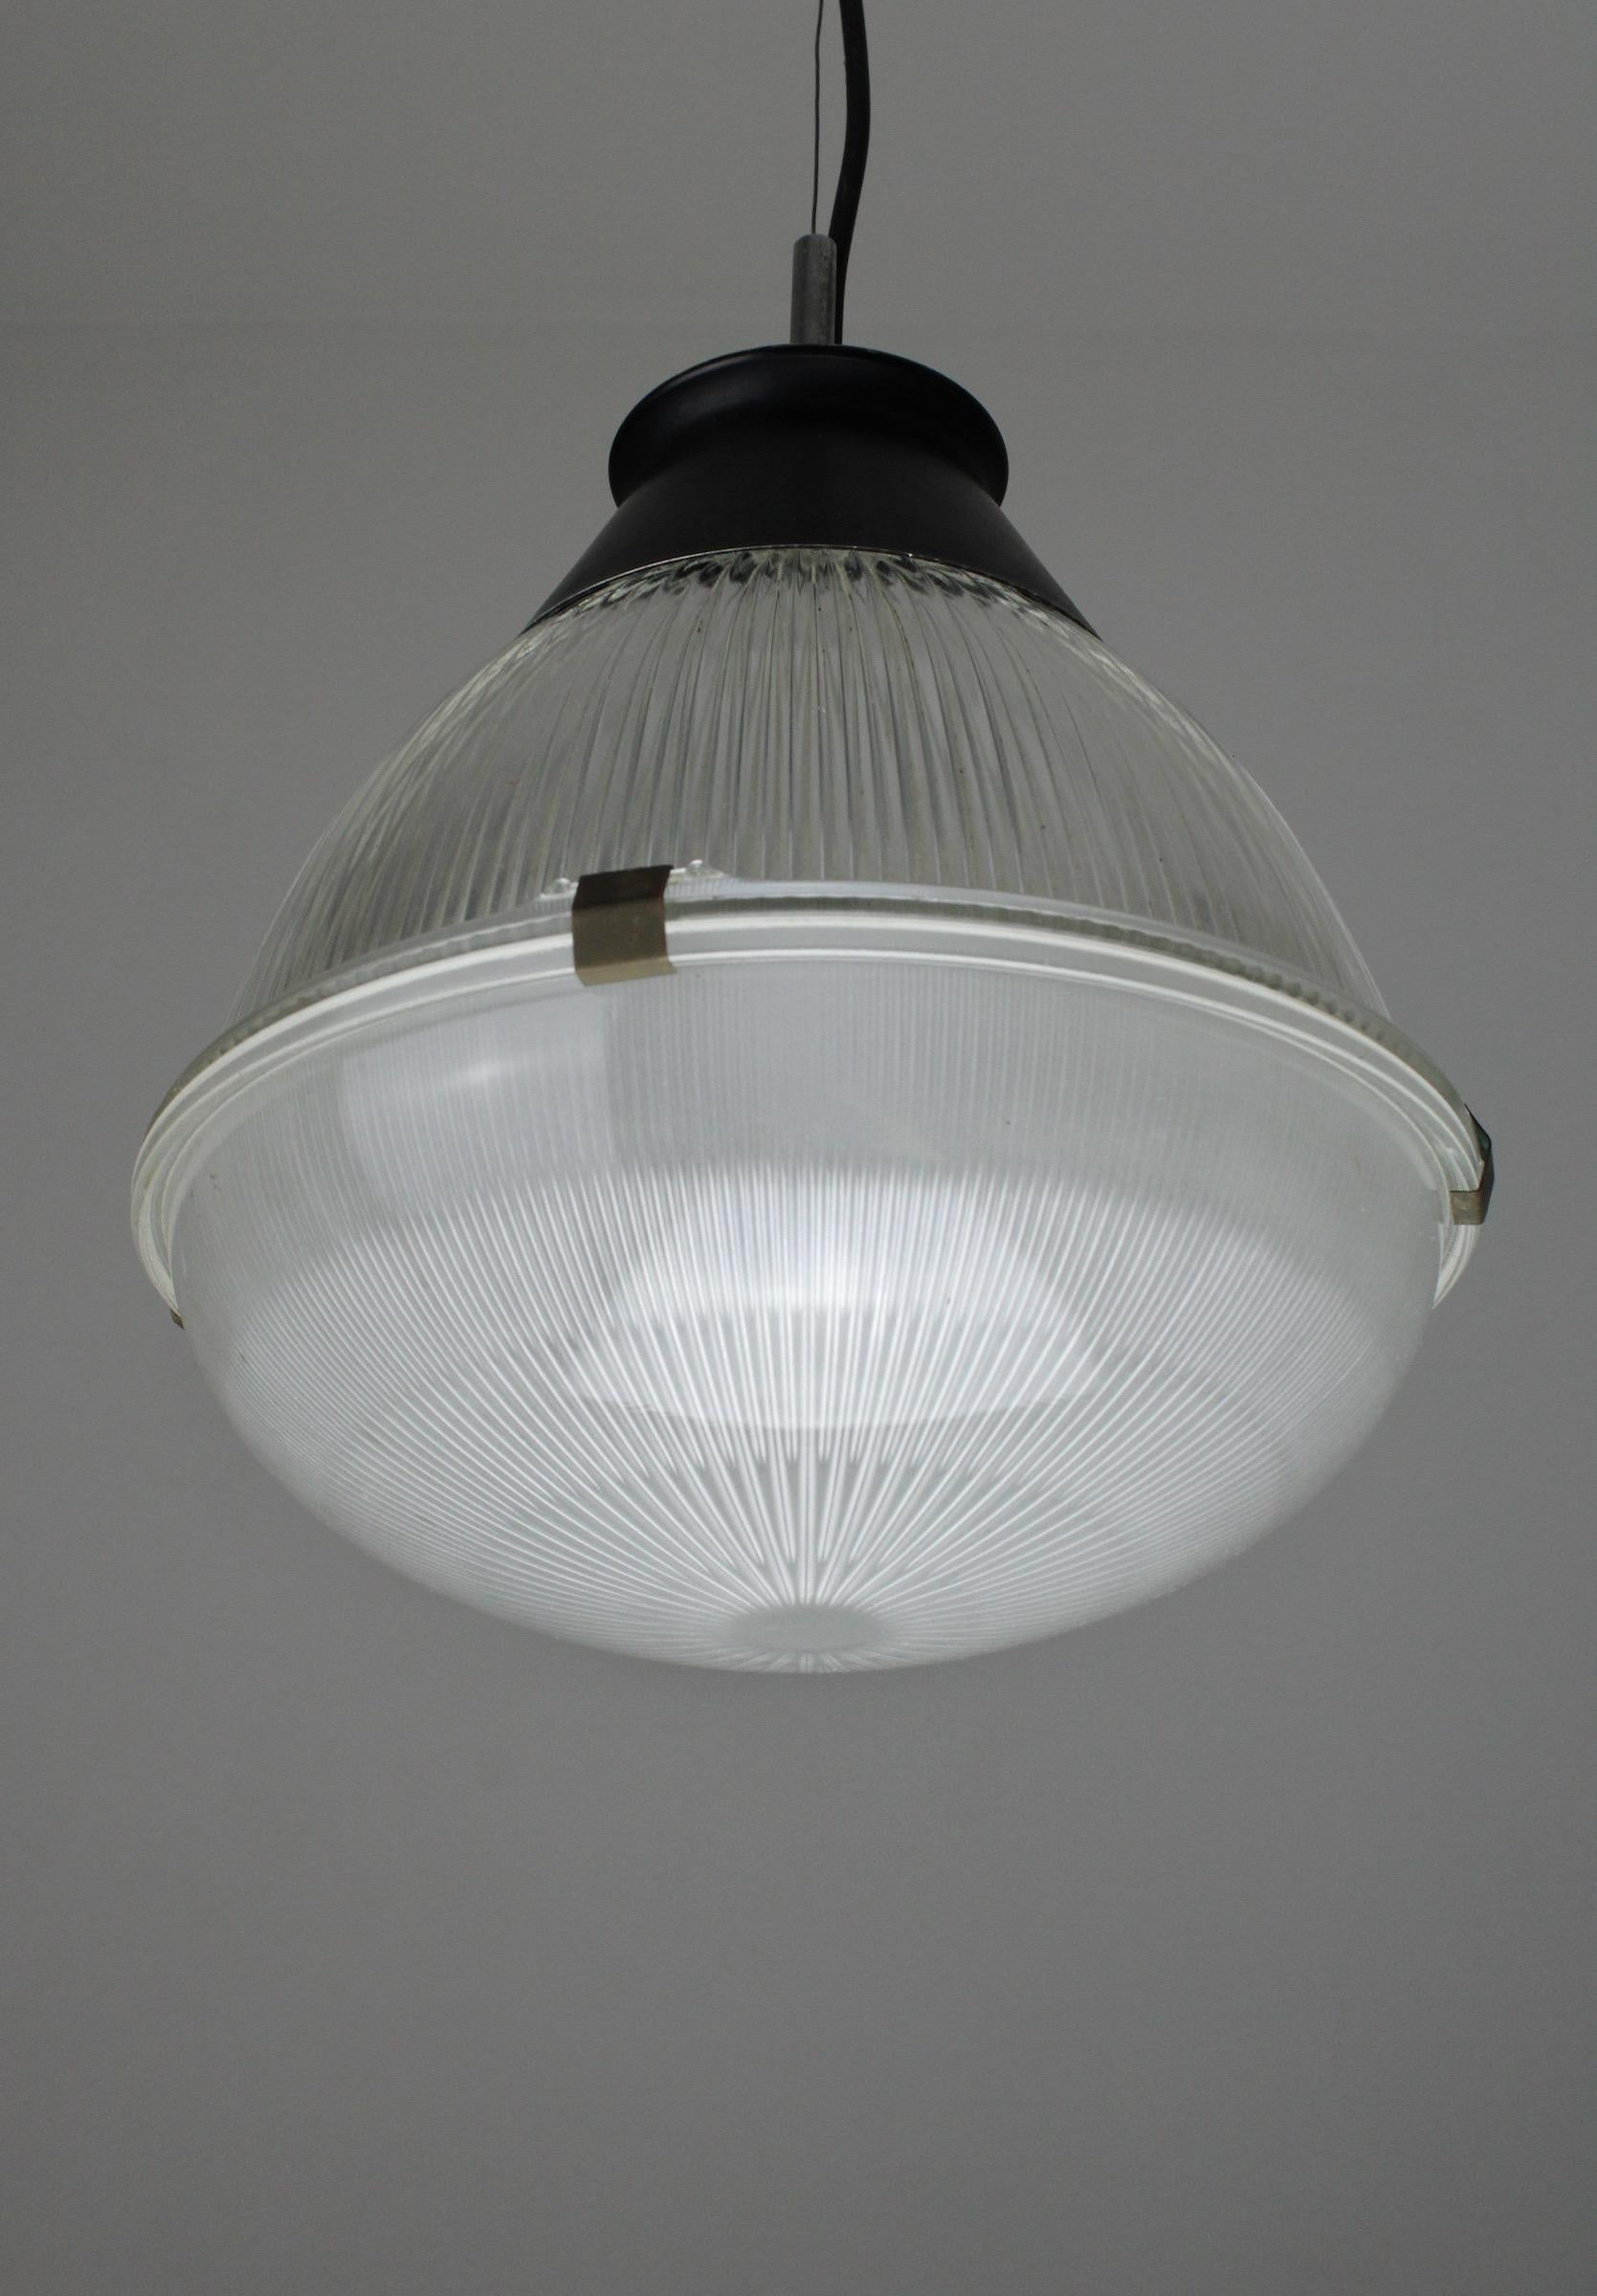 Mid-20th Century Model 4409 Pendant Lamp by Tito Agnoli for Oluce, 1958 For Sale